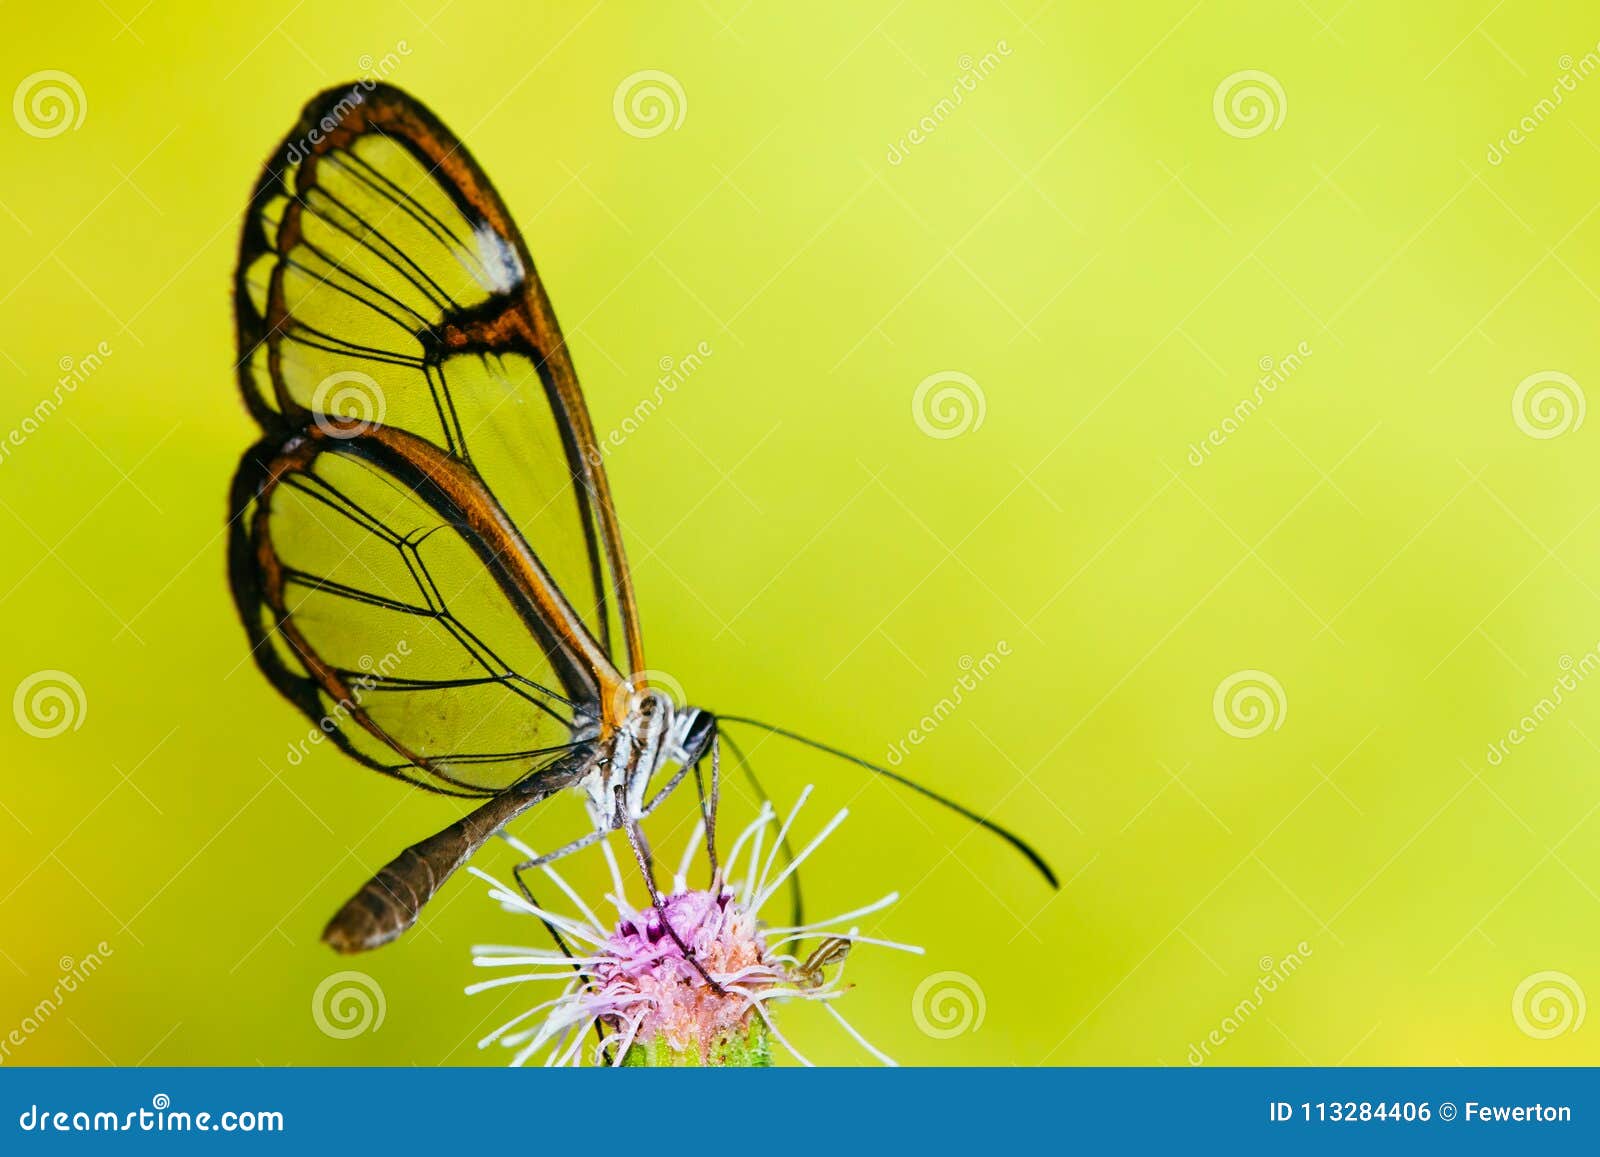 butterfly on flower. clearwing butterfly with transparent `glass` wings greta oto closeup sitting drinking nectar purple flower